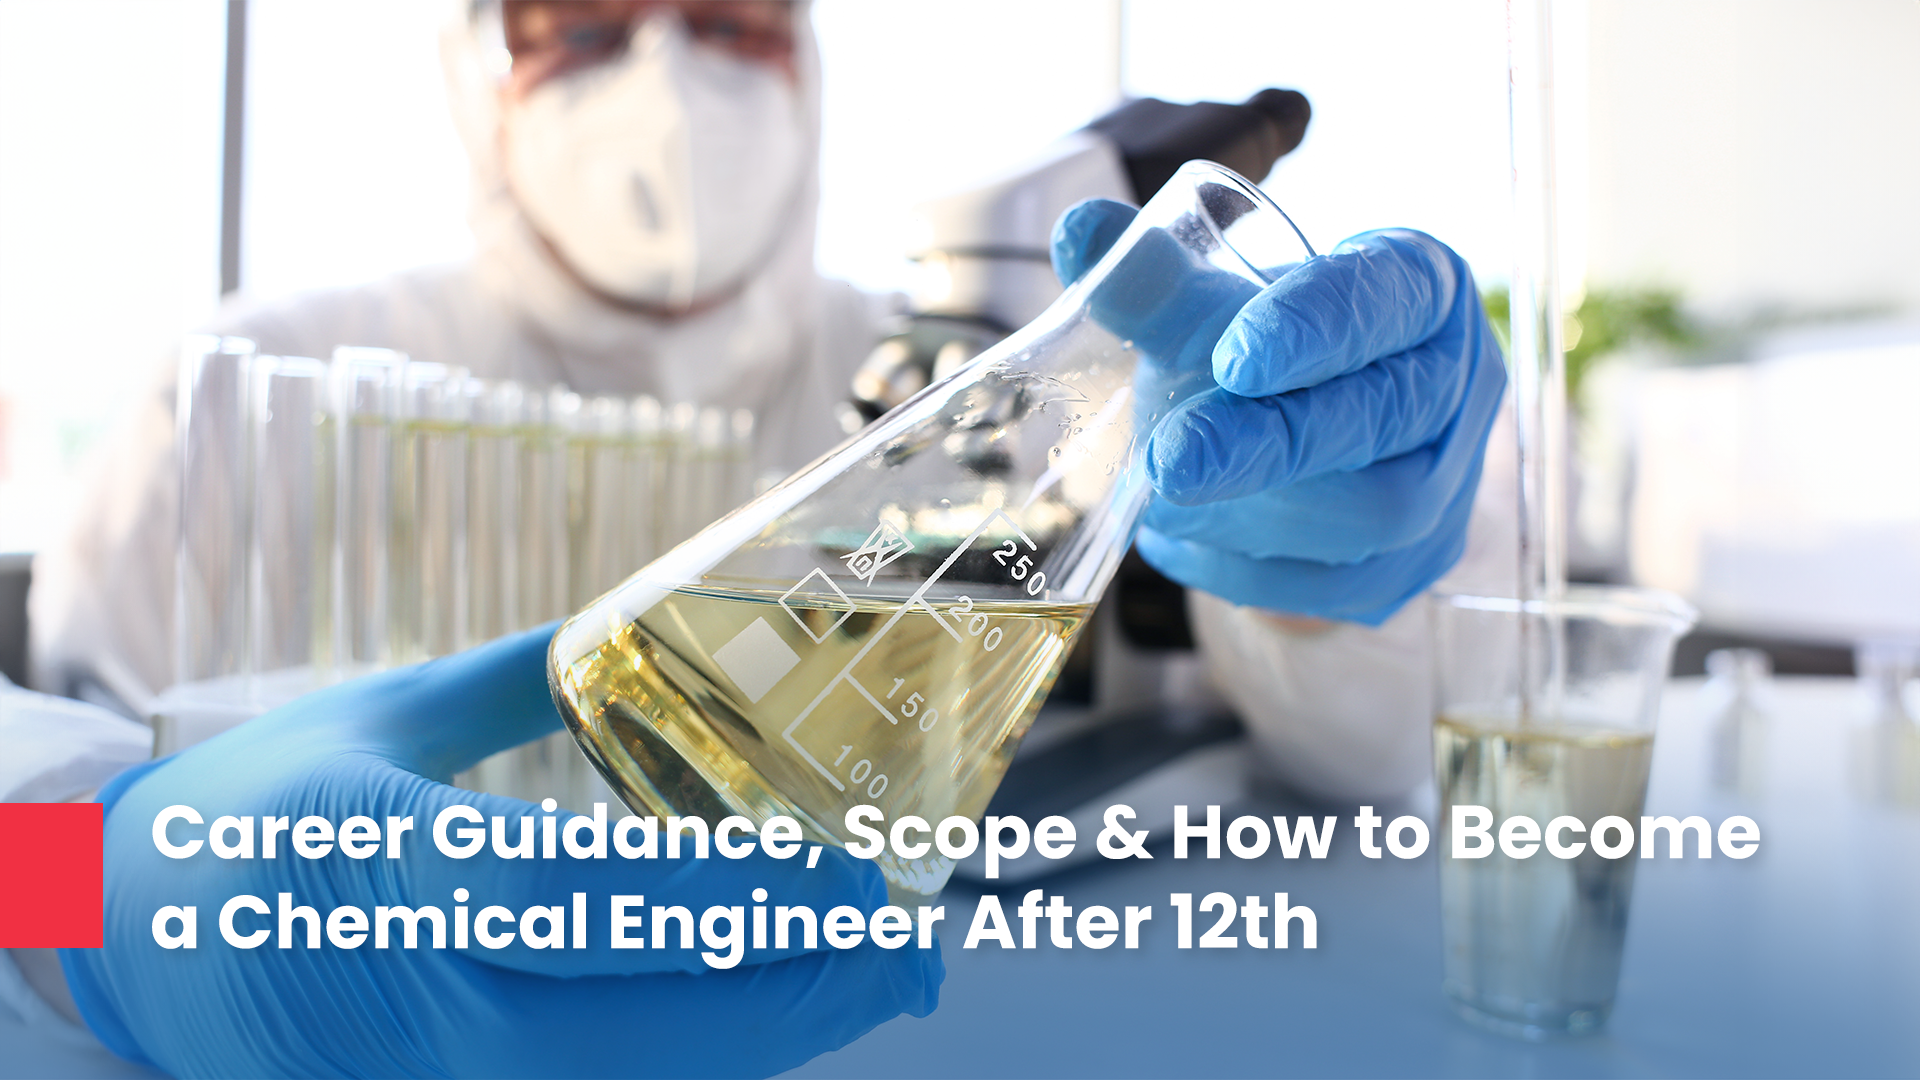 Career Guidance, Scope & How to Become a Chemical Engineer After 12th